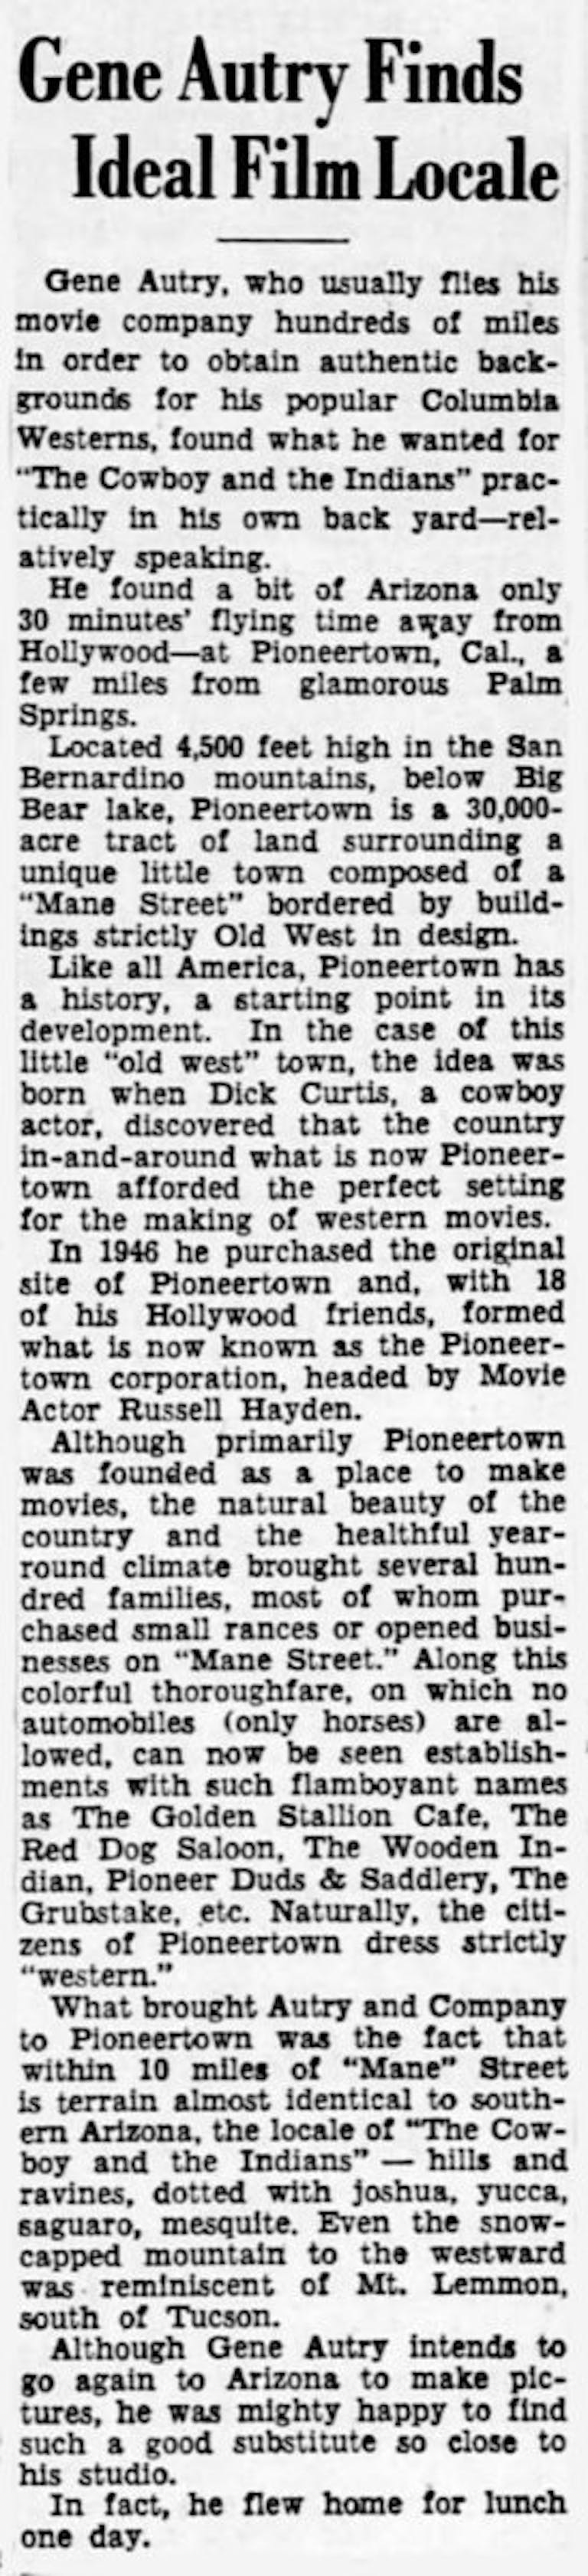 July 2, 1949 - Lansing State Journal article clipping